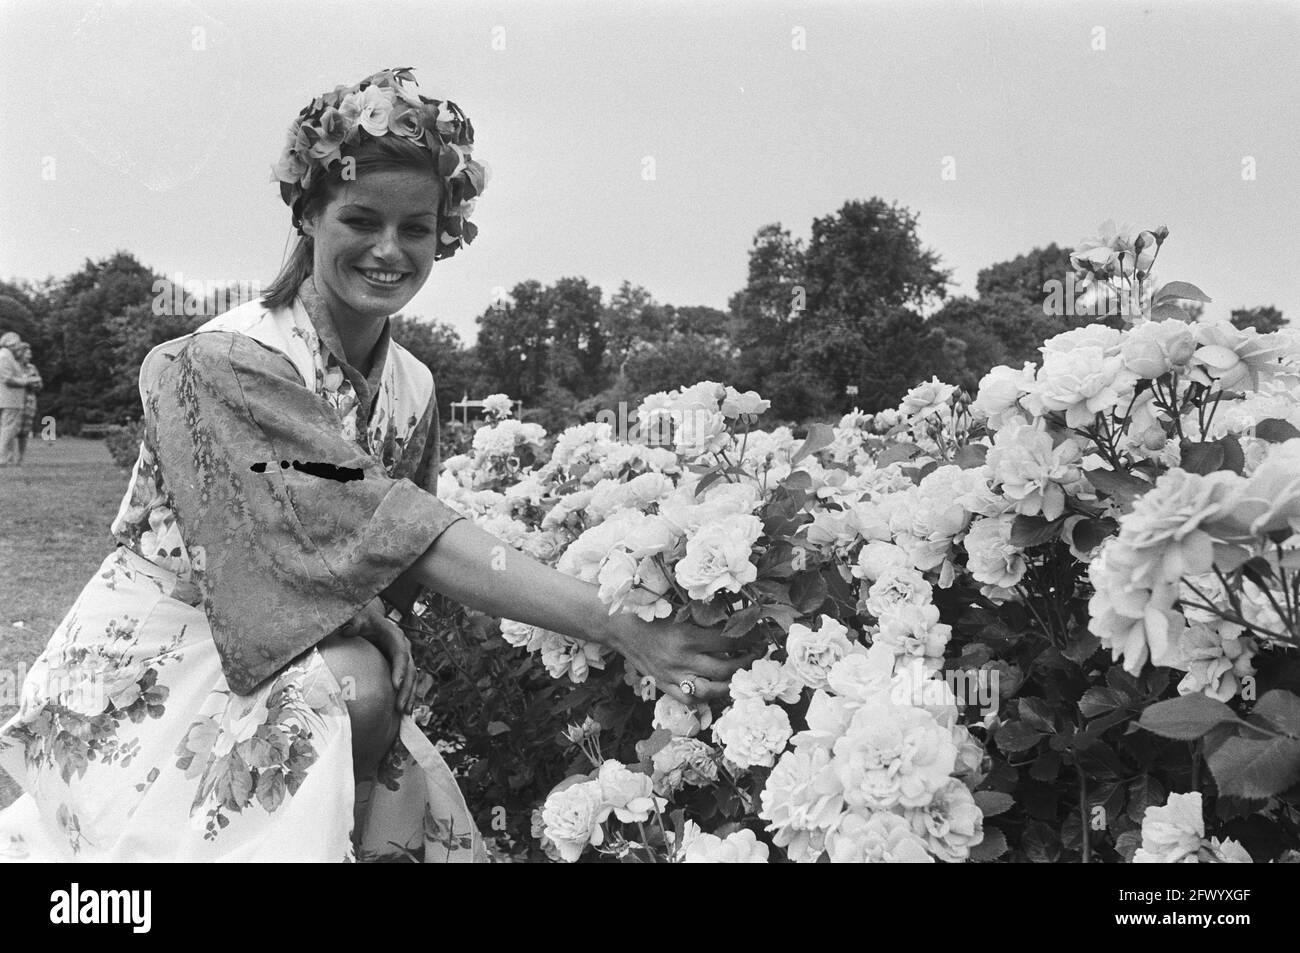 Rose Queen Ada Erotsieck visits rose exhibition in The Hague, July 10, 1976, exhibitions, The Netherlands, 20th century press agency photo, news to remember, documentary, historic photography 1945-1990, visual stories, human history of the Twentieth Century, capturing moments in time Stock Photo